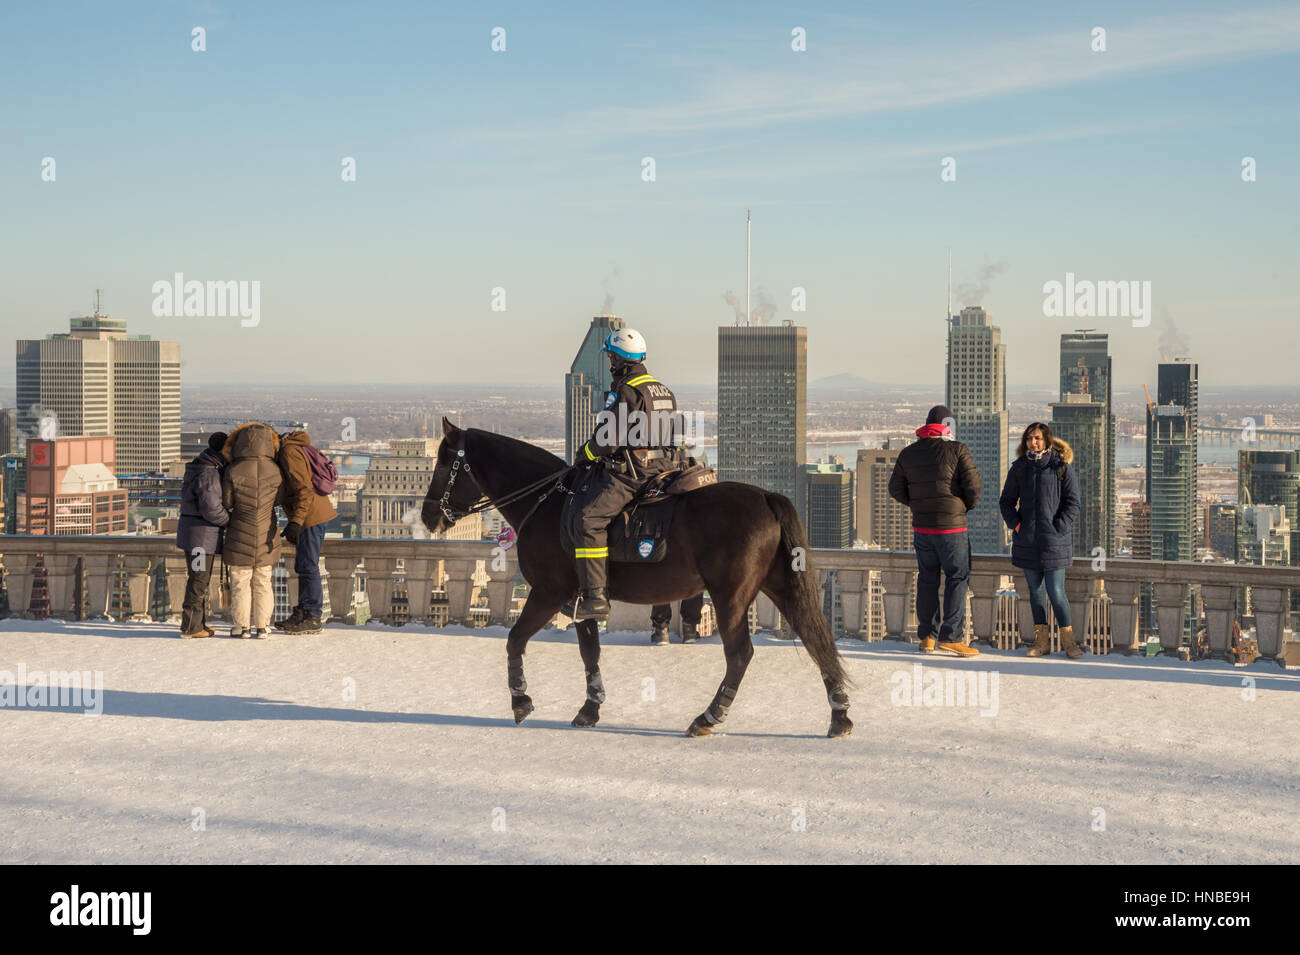 Montreal, CA - 10 February 2017: RCMP Mounted police officer patroling on Kondiaronk Belvedere on Mount-Royal Stock Photo